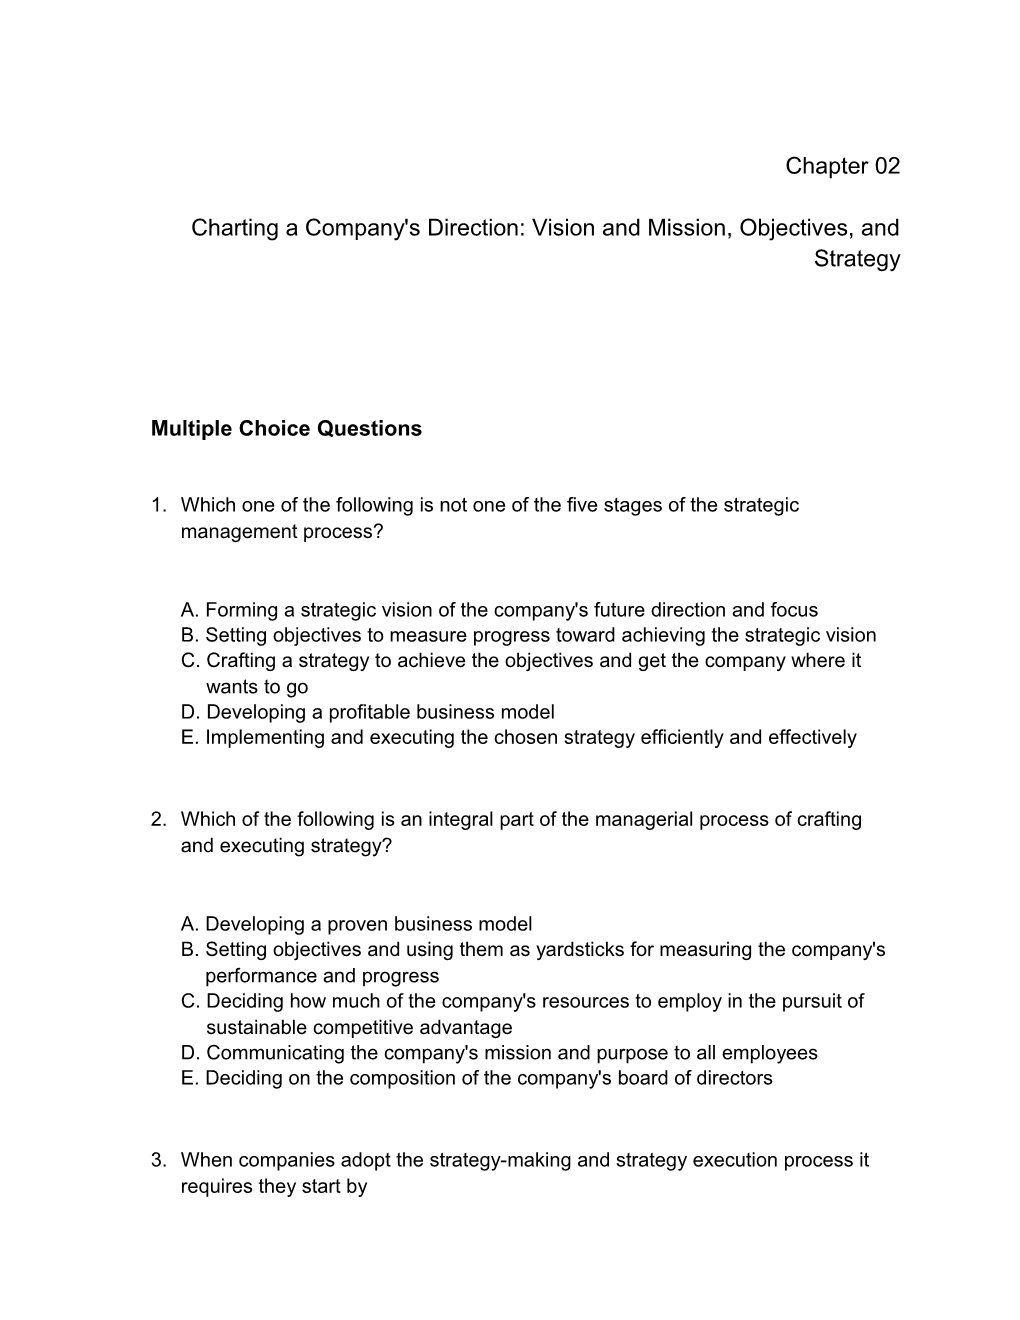 Charting a Company's Direction: Vision and Mission, Objectives, and Strategy